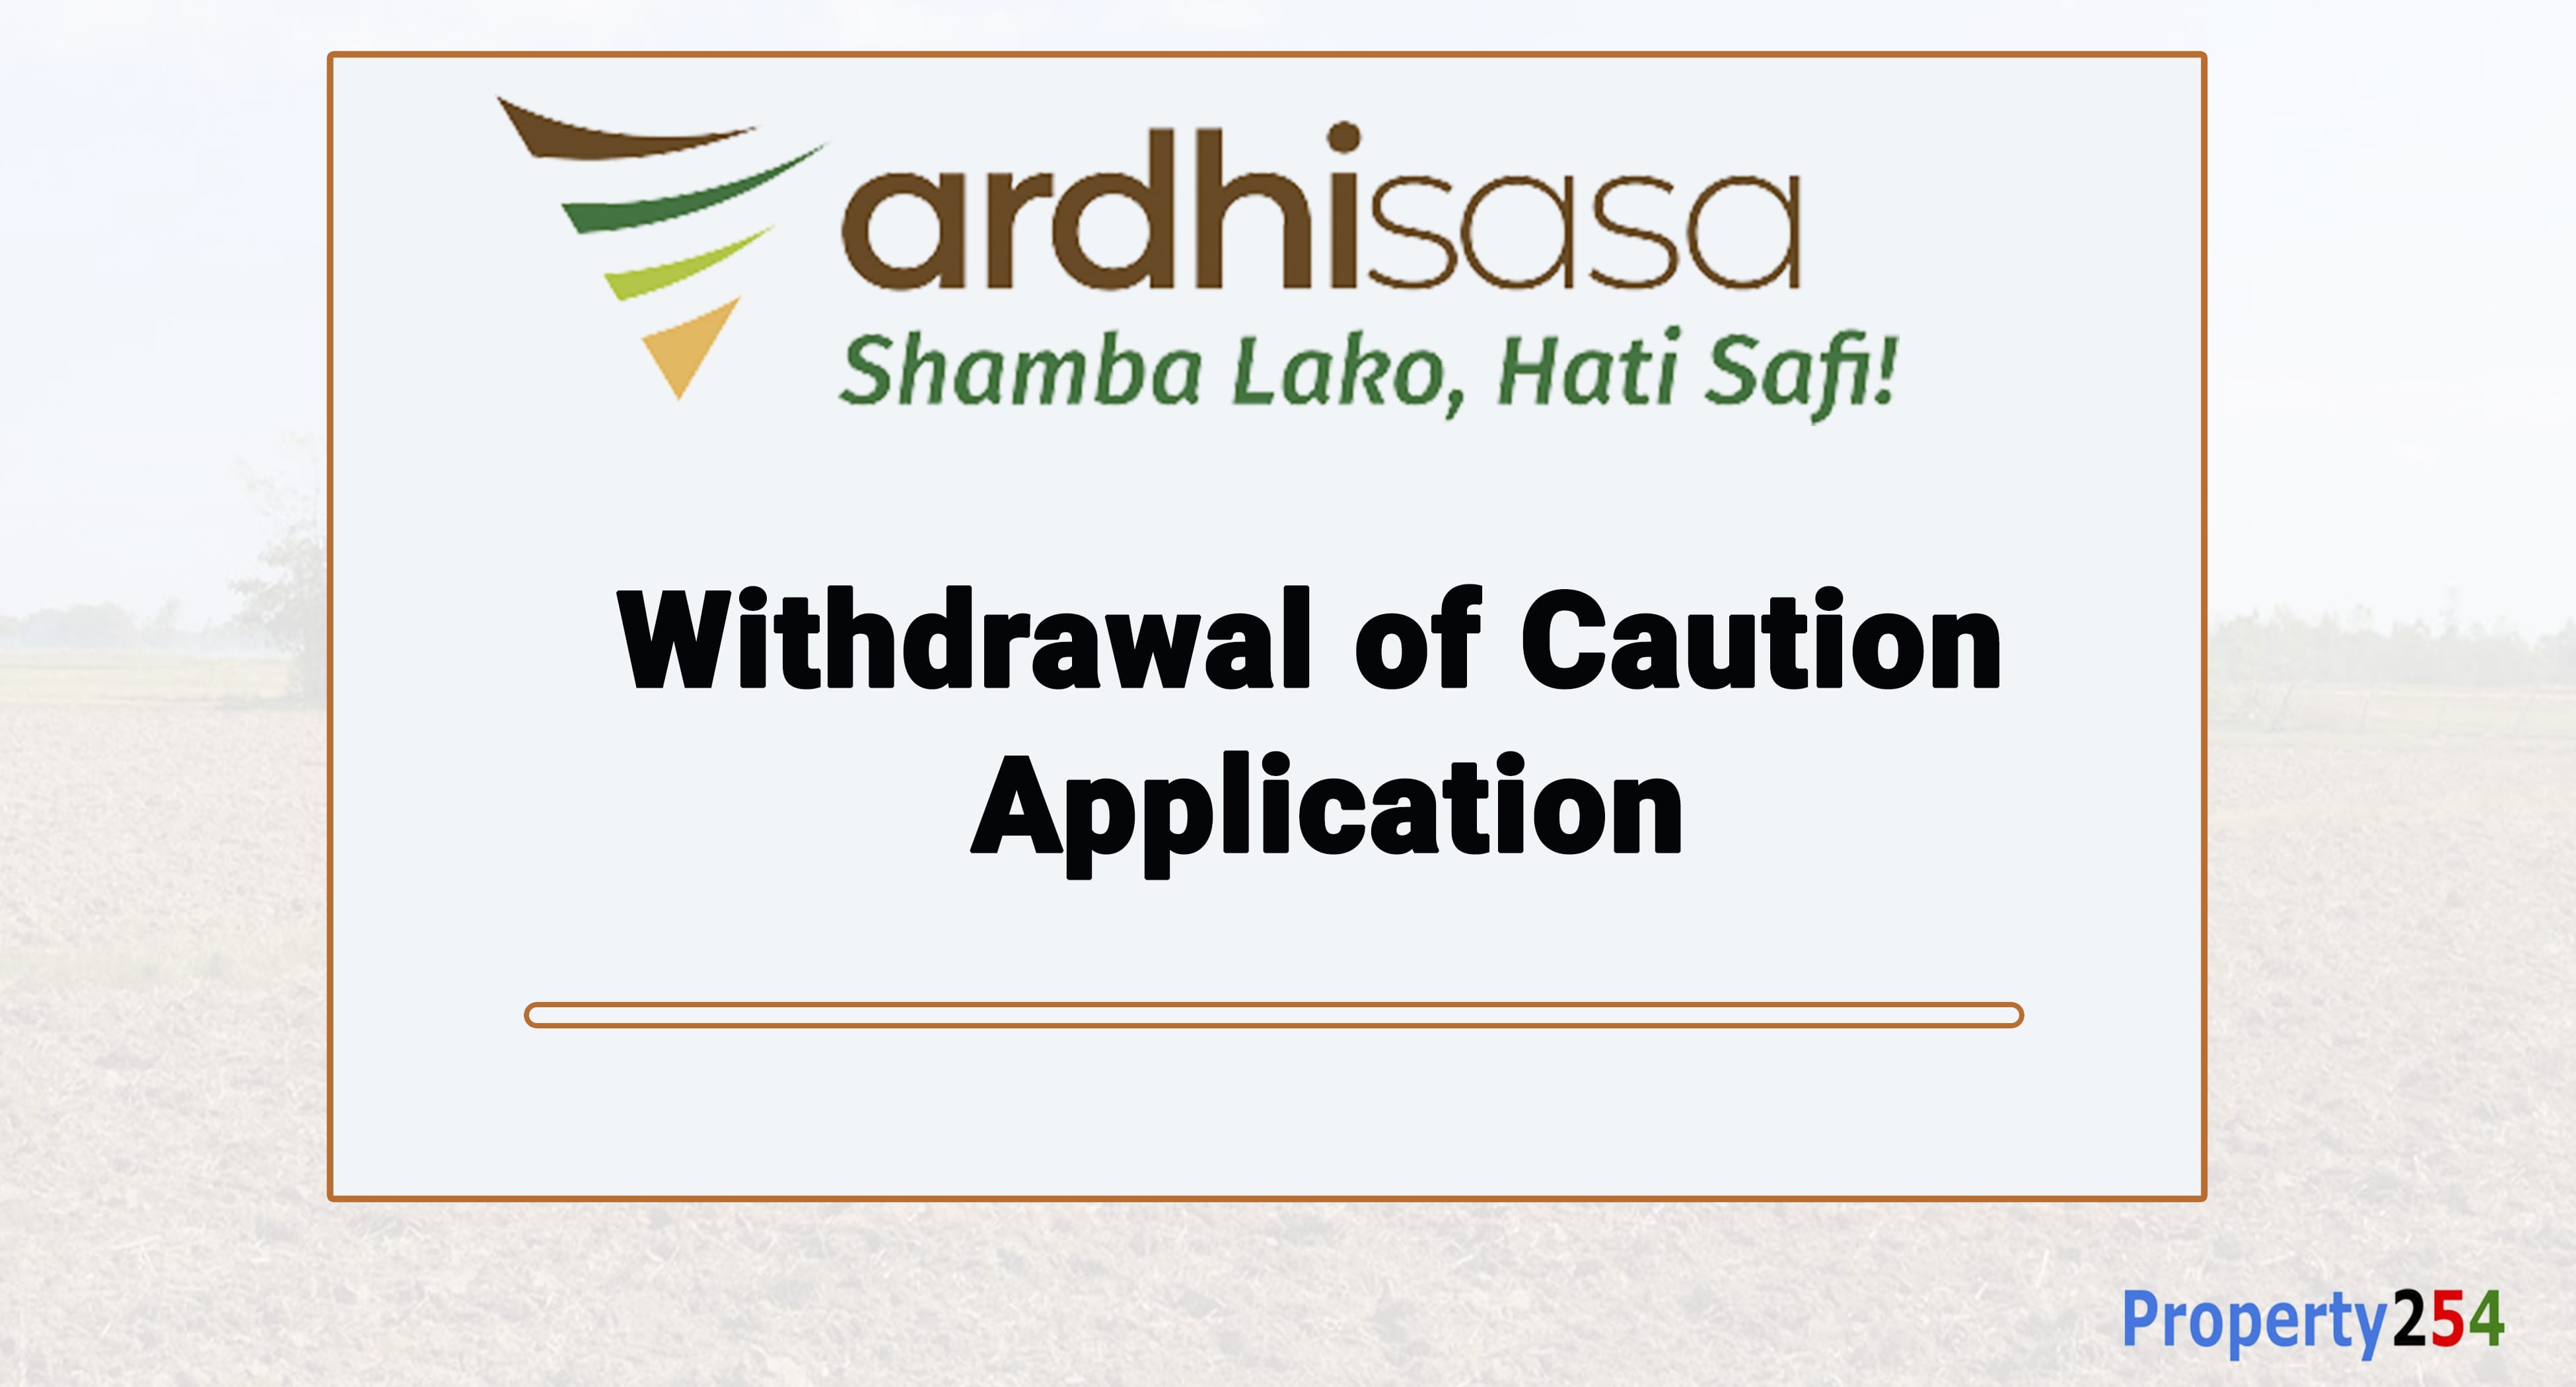 Registration of Withdrawal of Caution Application on Ardhisasa thumbnail